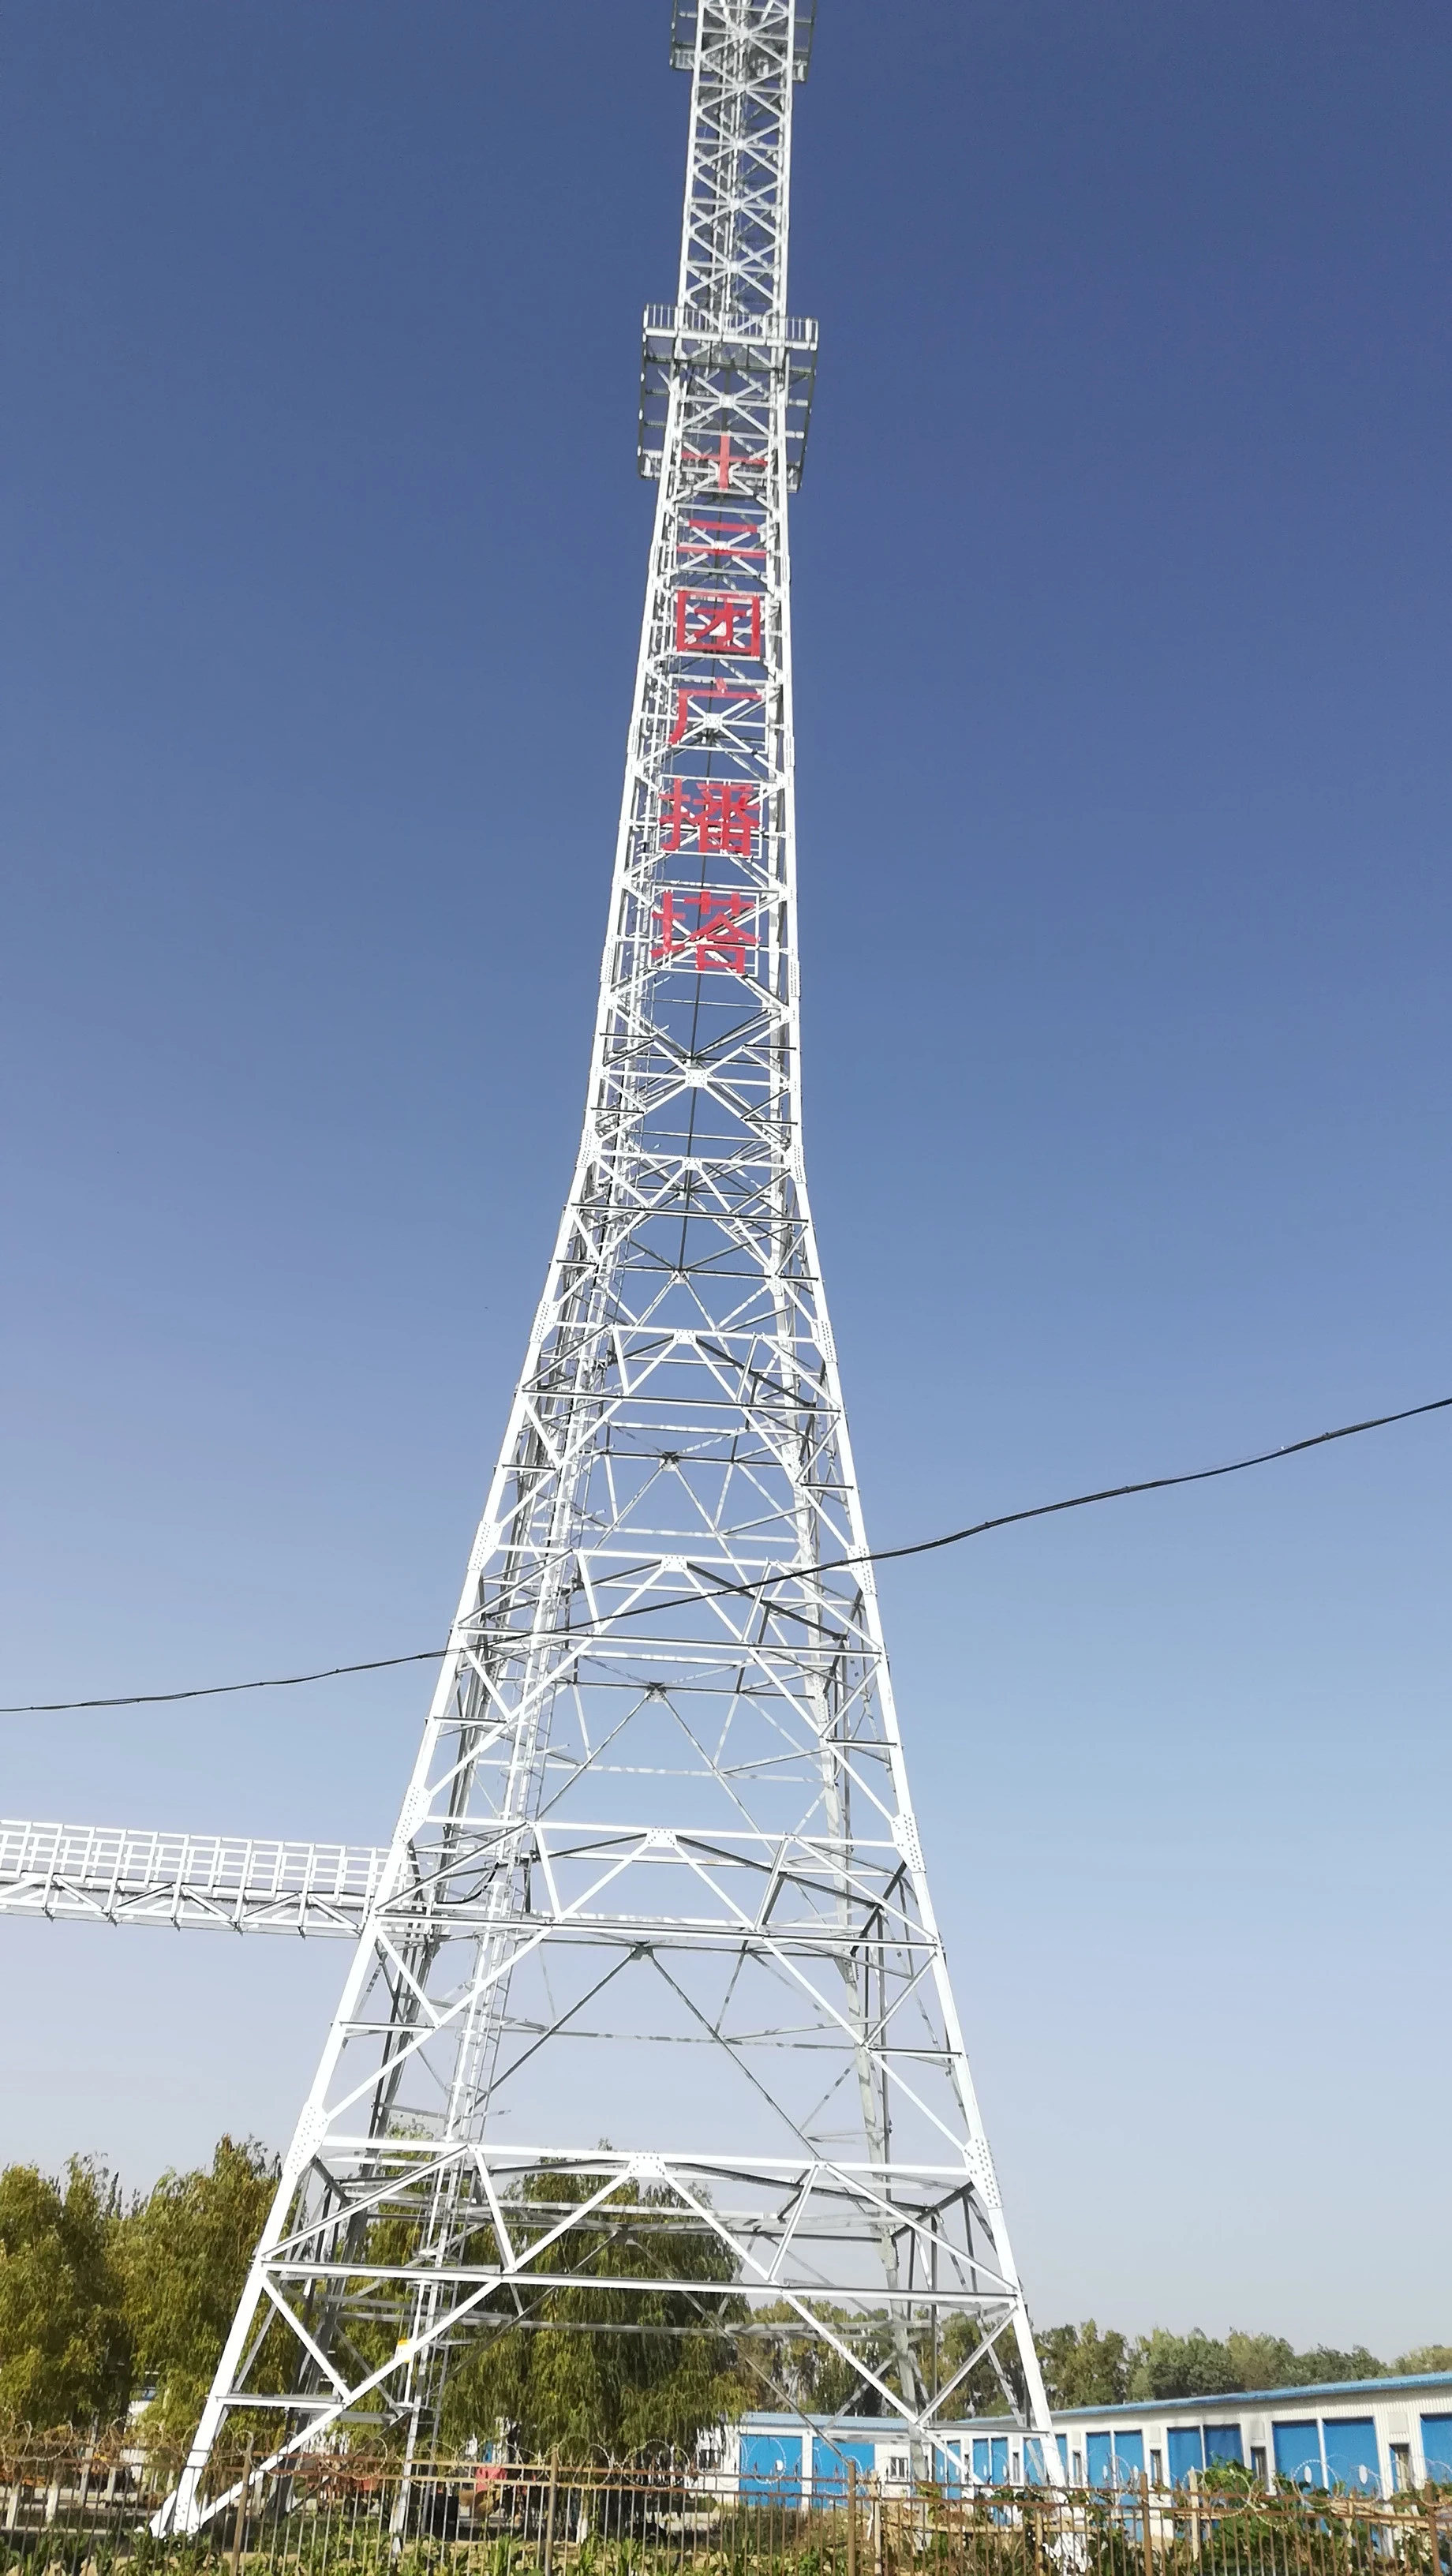 Angle steel tower communication tower telecom tower